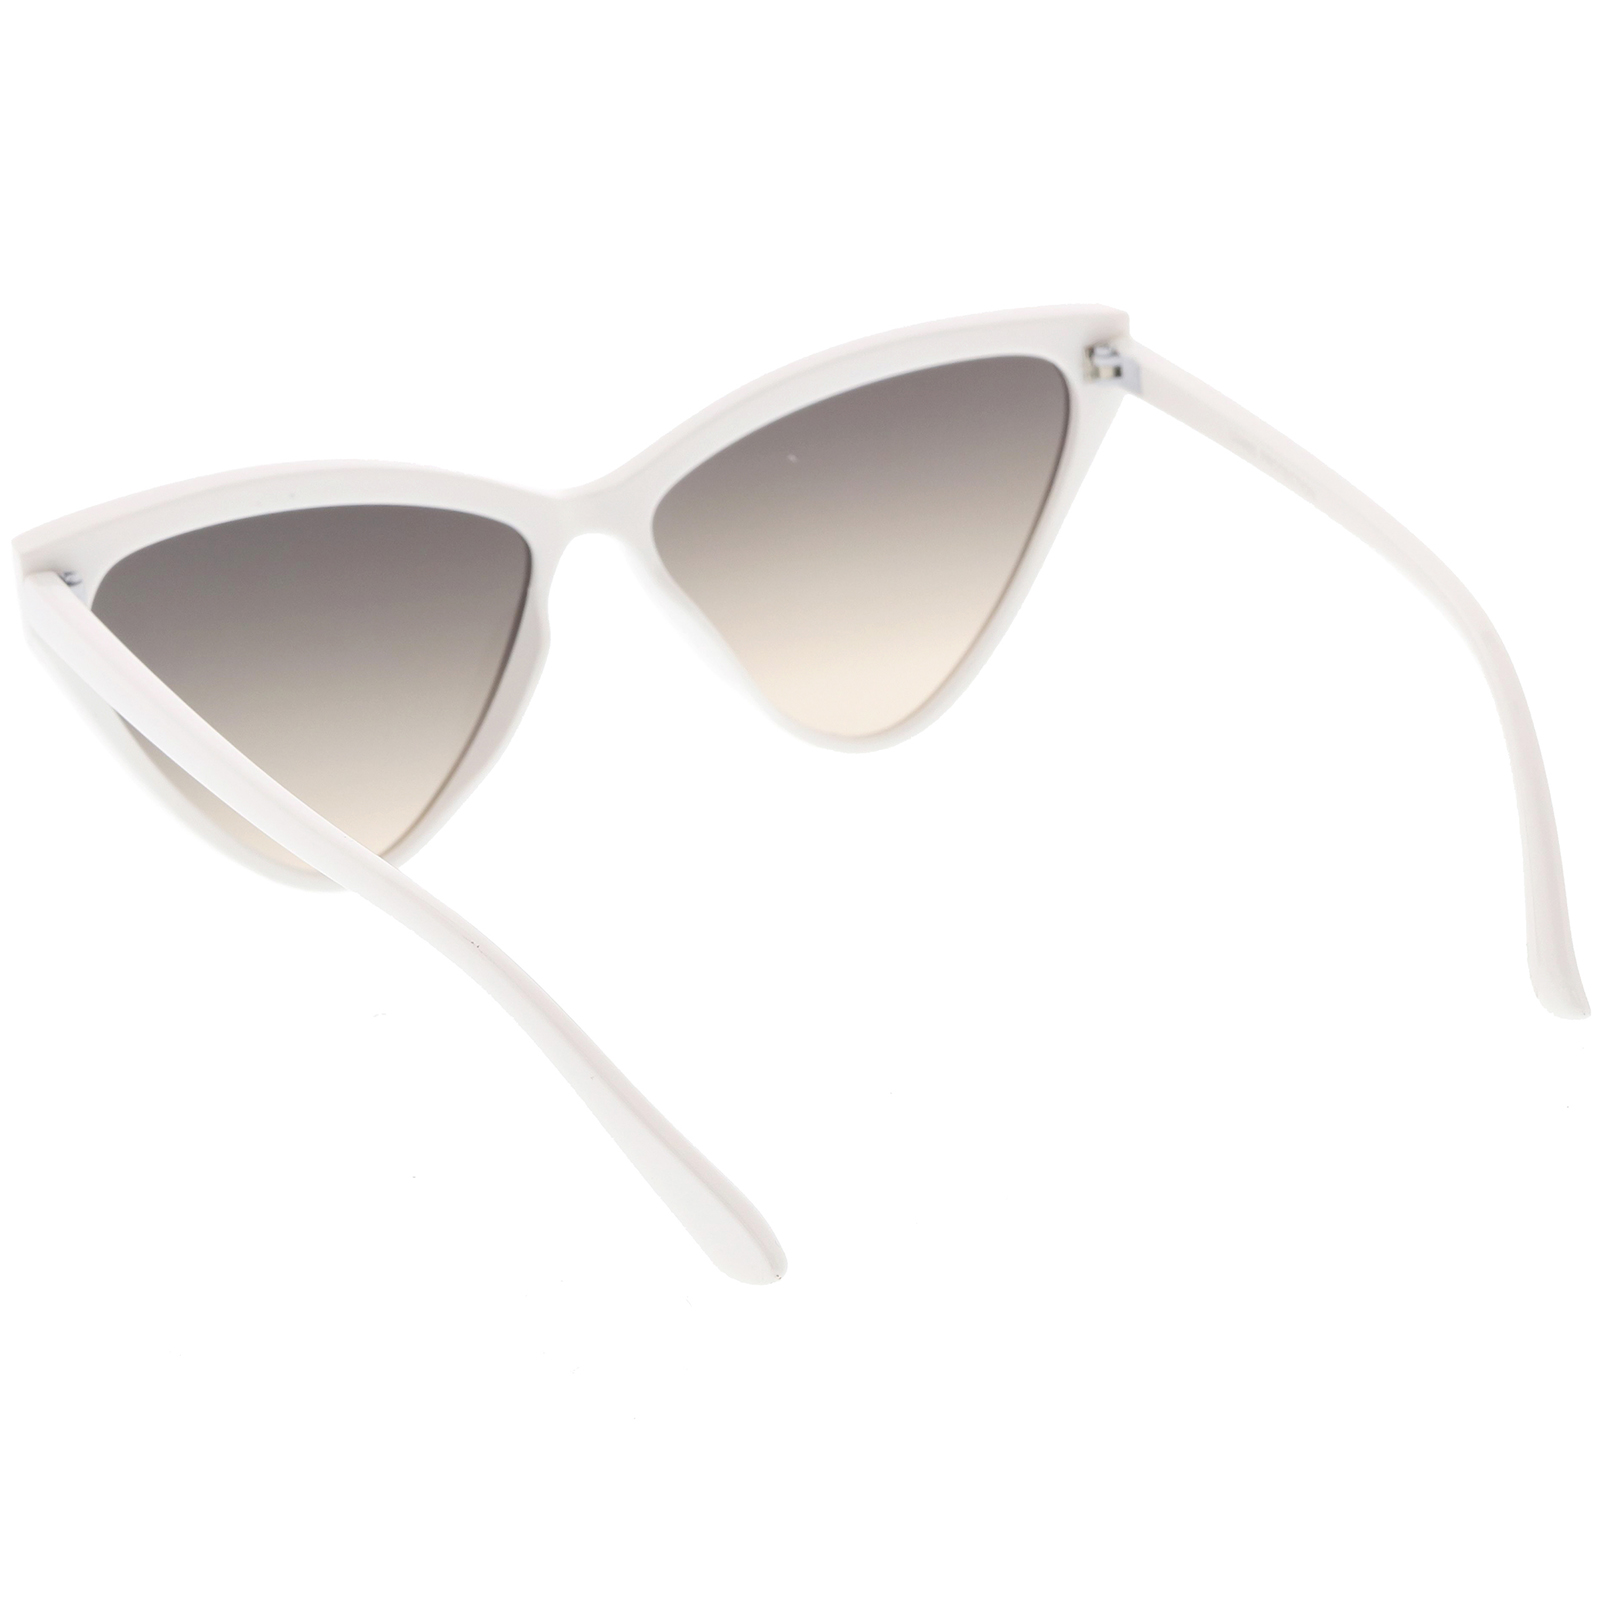 Oversize Vintage Cat Eye Sunglasses Color Tinted Lens 59mm (White / Smoke Gradient) - image 4 of 4